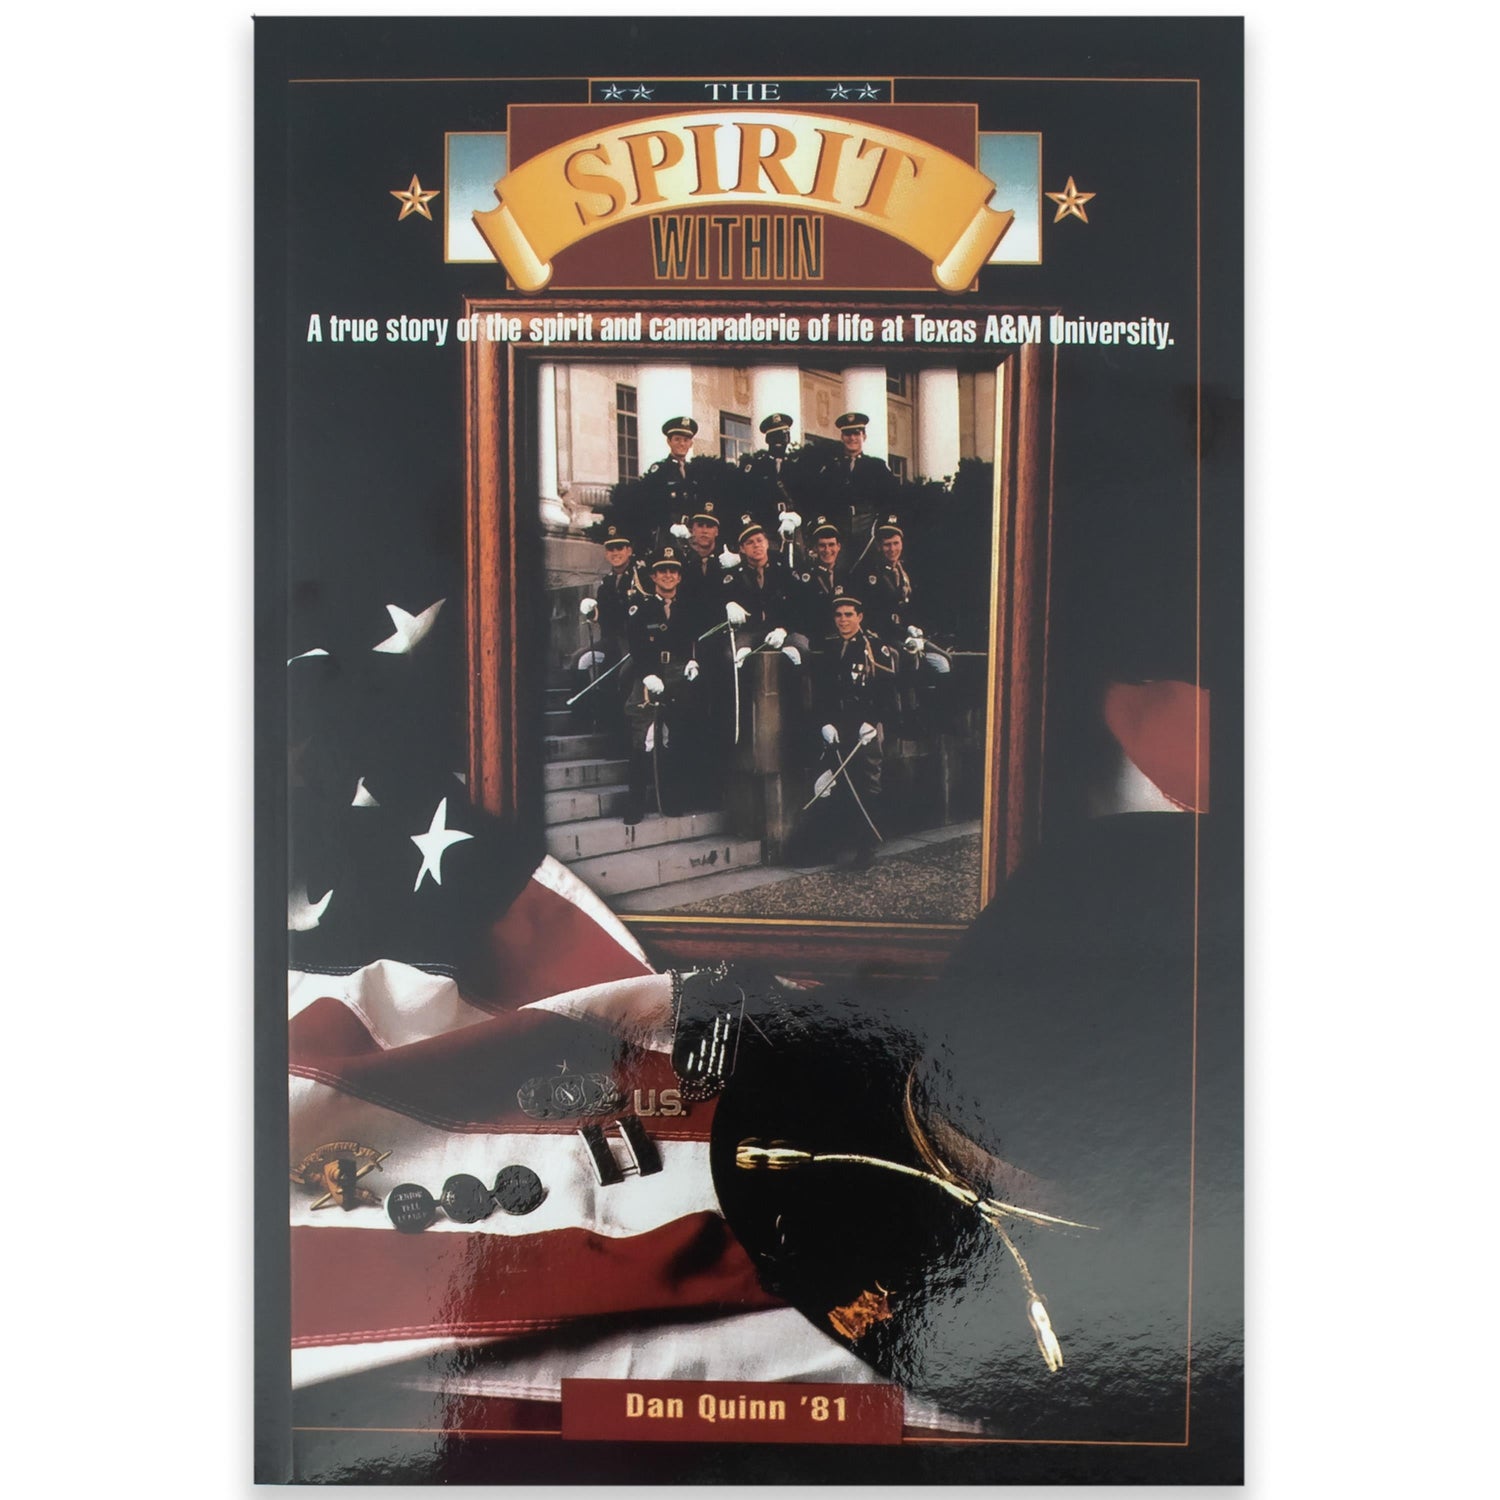 The Spirit Within by Dan Quinn '81